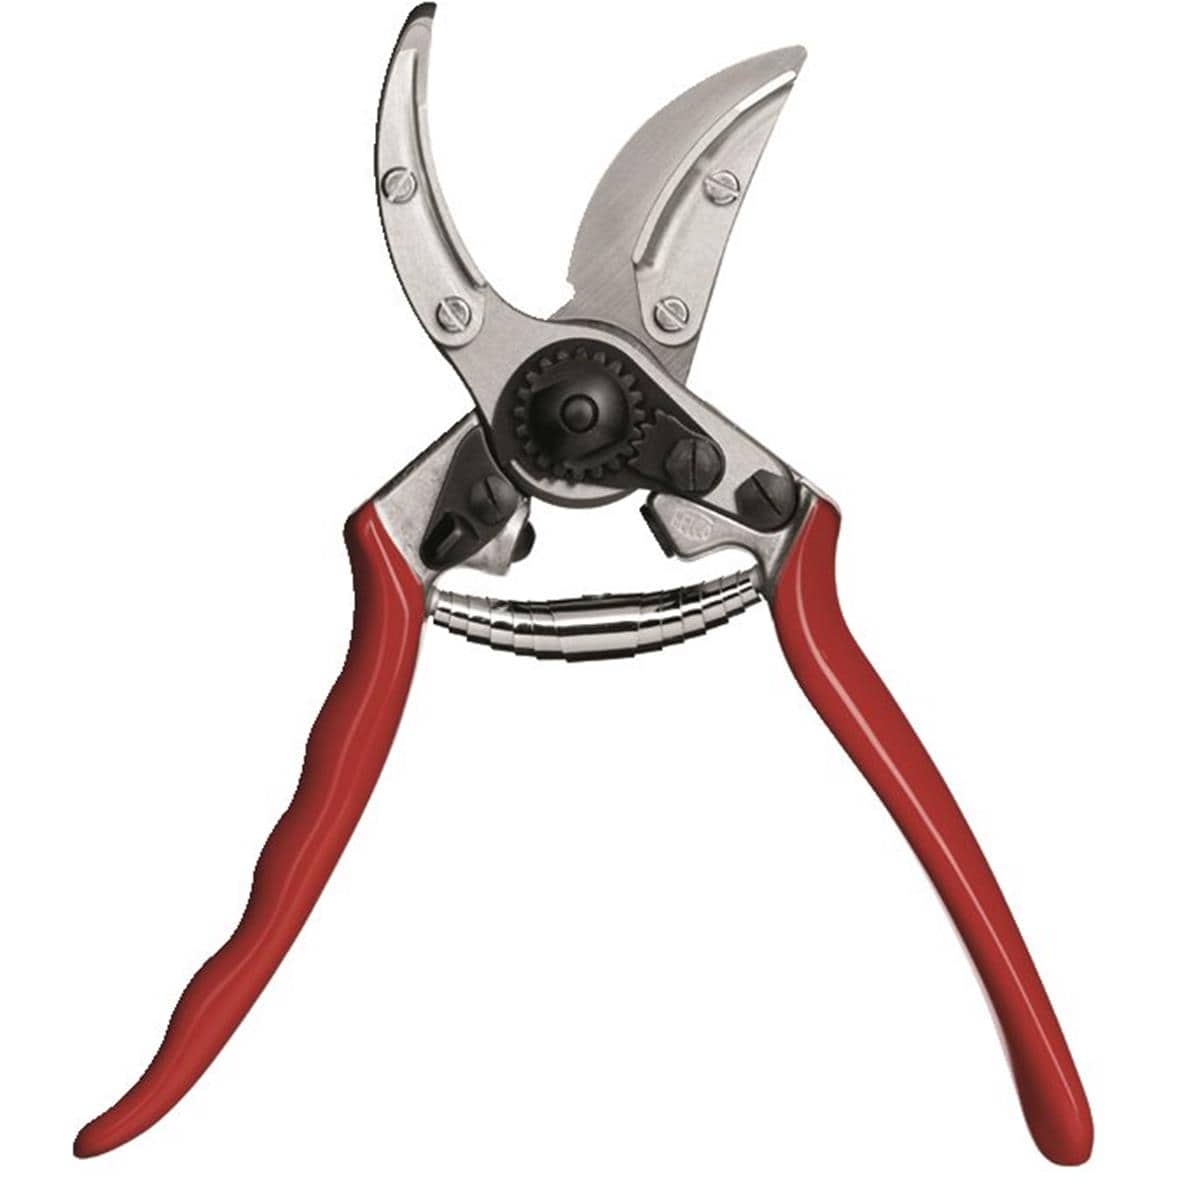 FELCO® 100 Cut-and-Hold Hand Pruner